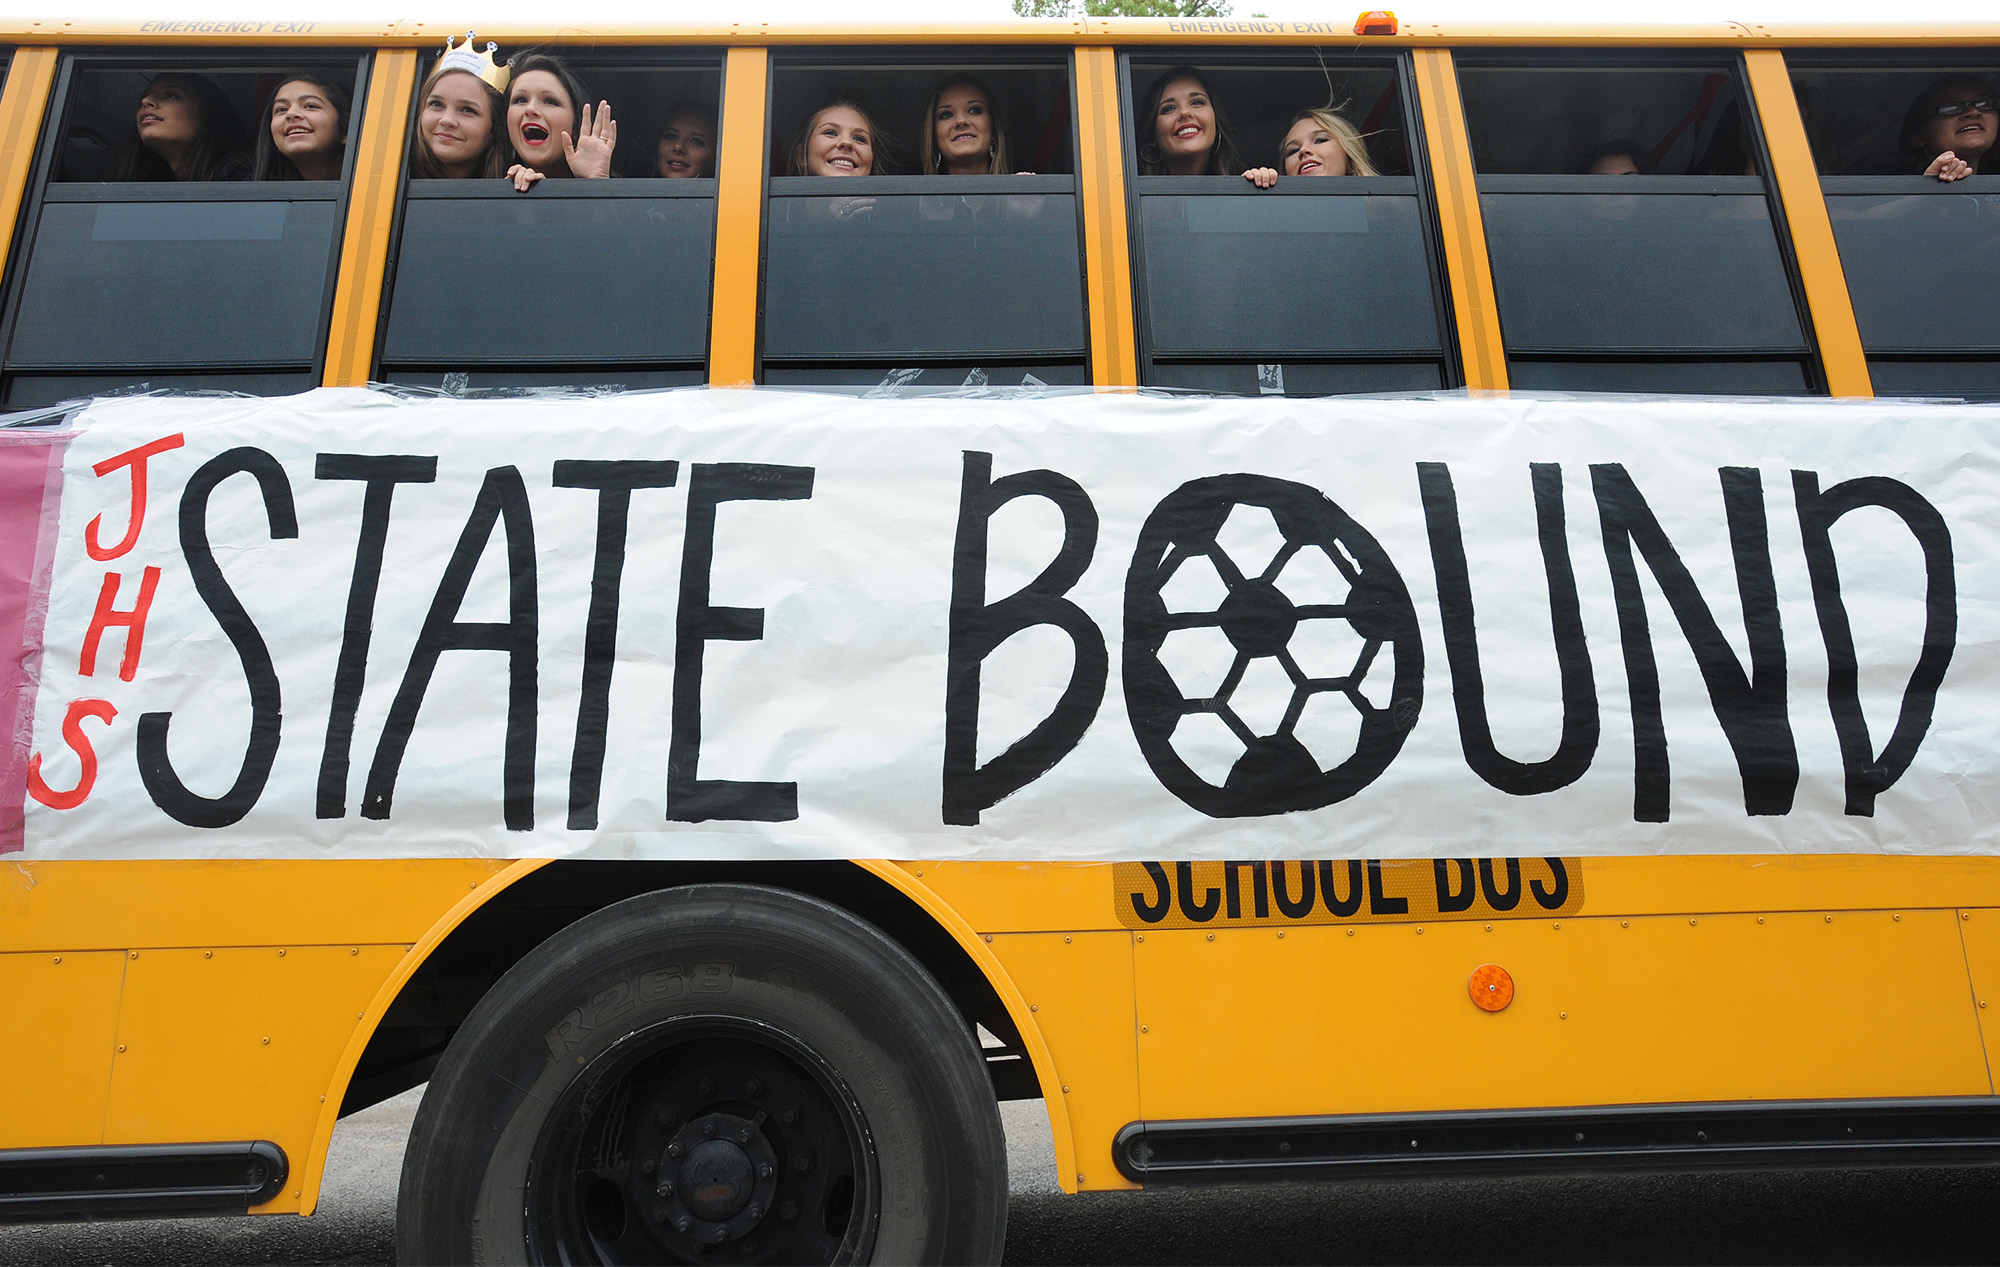 Statebound! The Girls Soccer Team Heads to State!